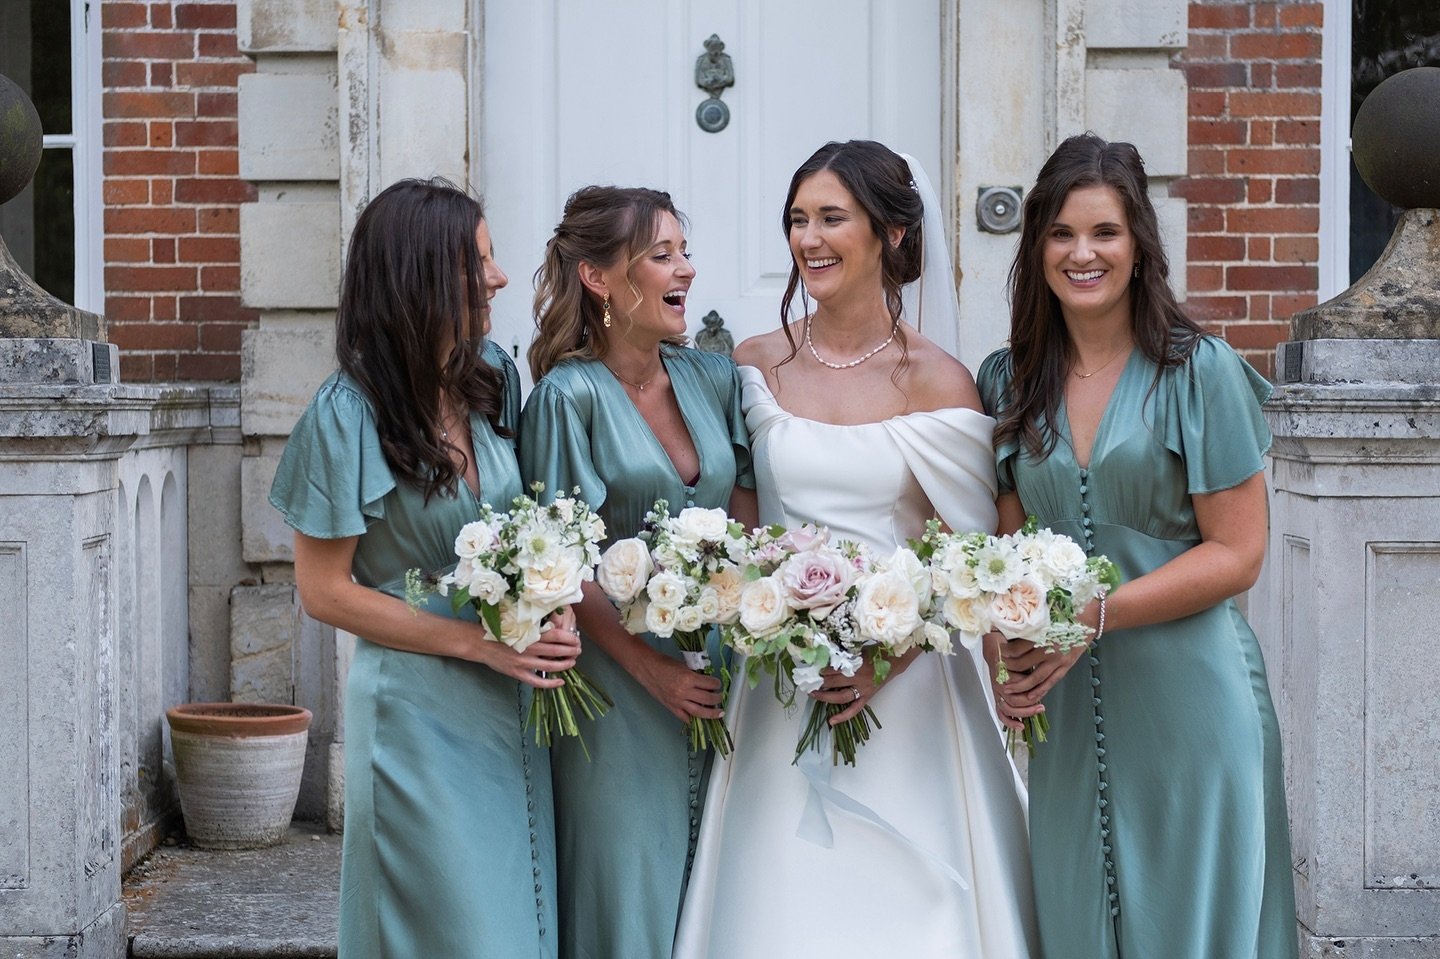 Anna and her bridesmaids last July. Bouquets jam packed with scented British roses from @rosebiemortonflowerstrade

@nordicpics 
@ardingtonhouseoxford